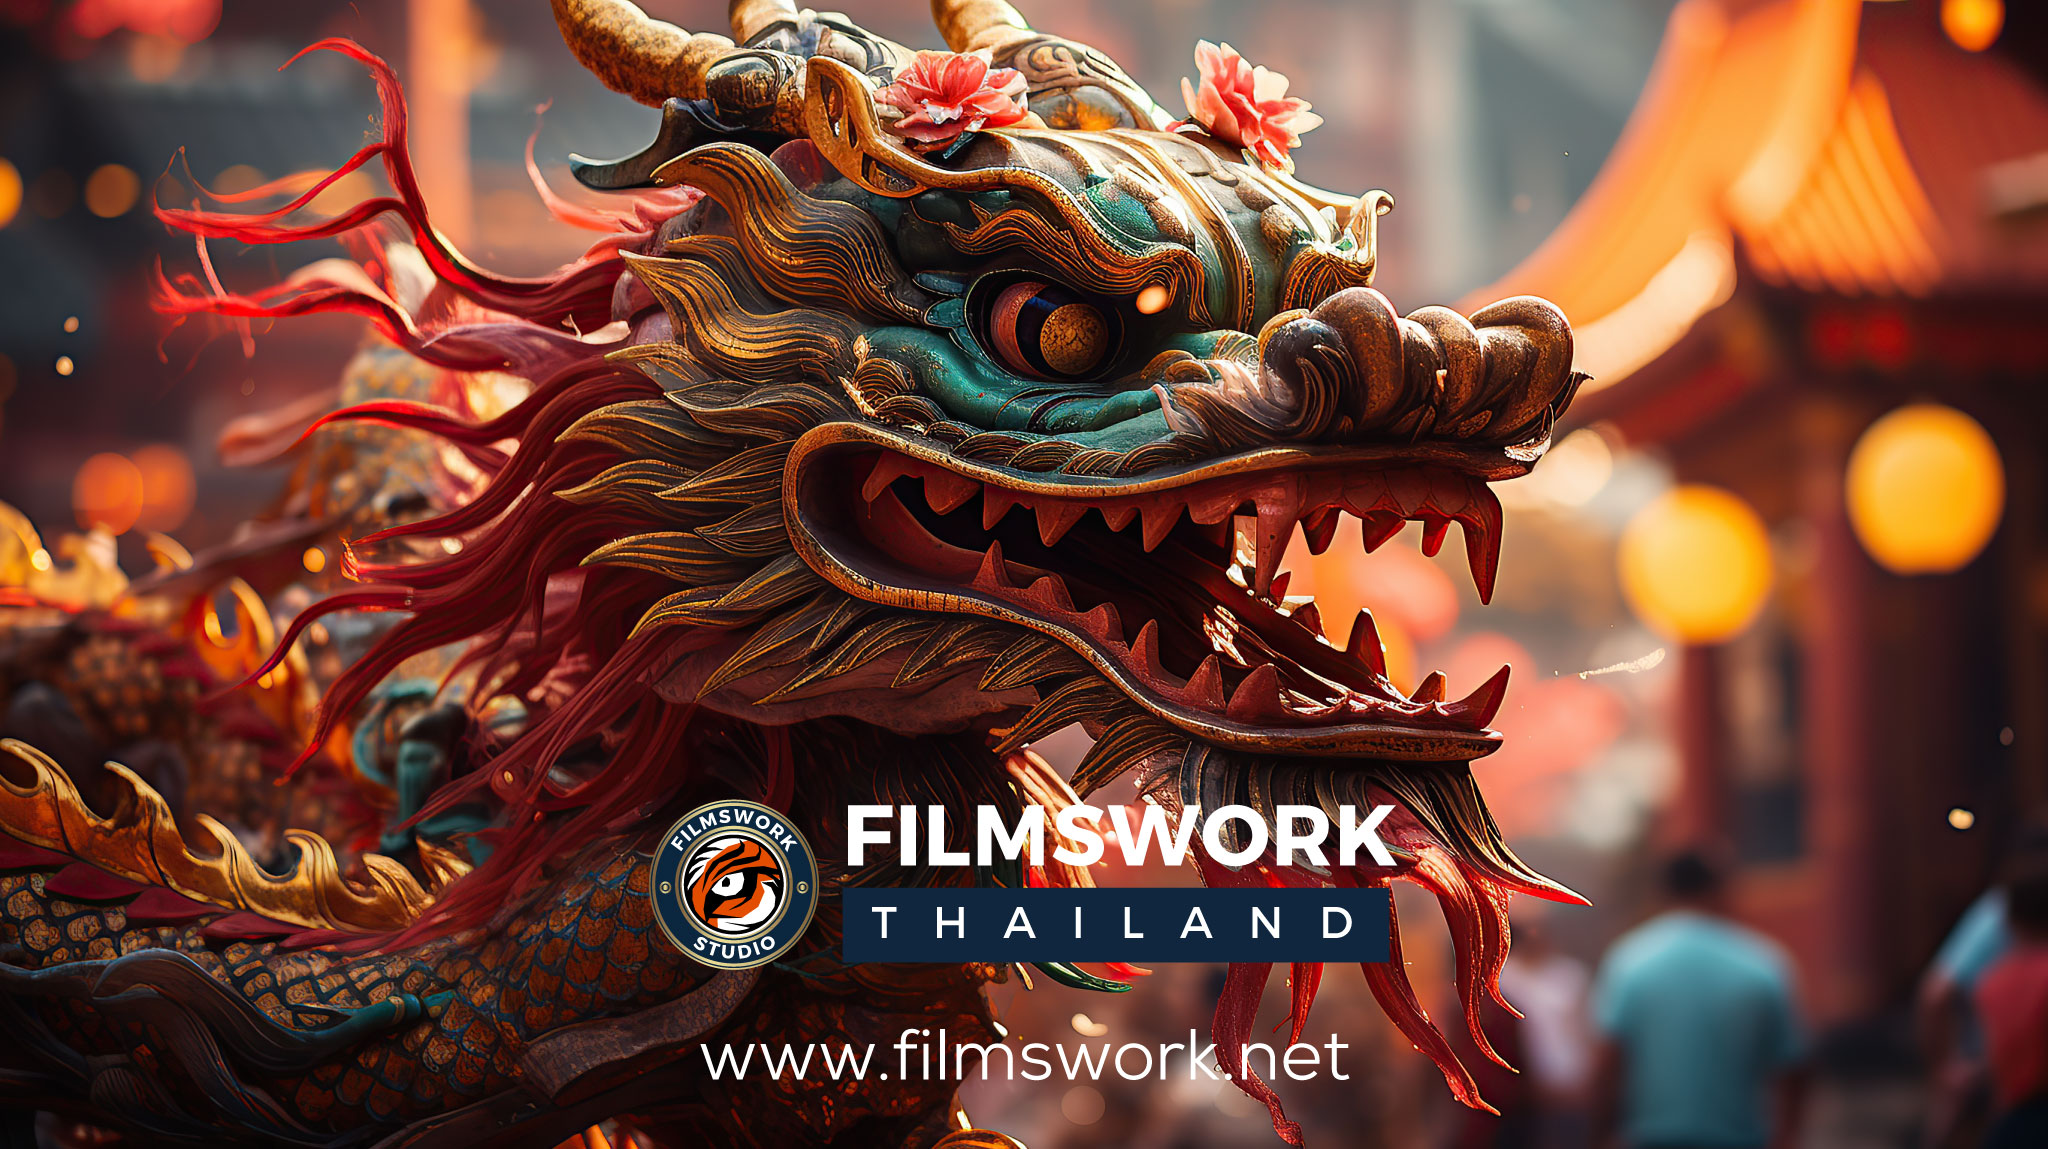 As the vibrant tapestry of cultures across the globe prepares to welcome the Chinese New Year, Filmswork, your trusted online digital media studio, extends its warmest wishes for a prosperous Year of the Dragon. Visit us at www.filmswork.net